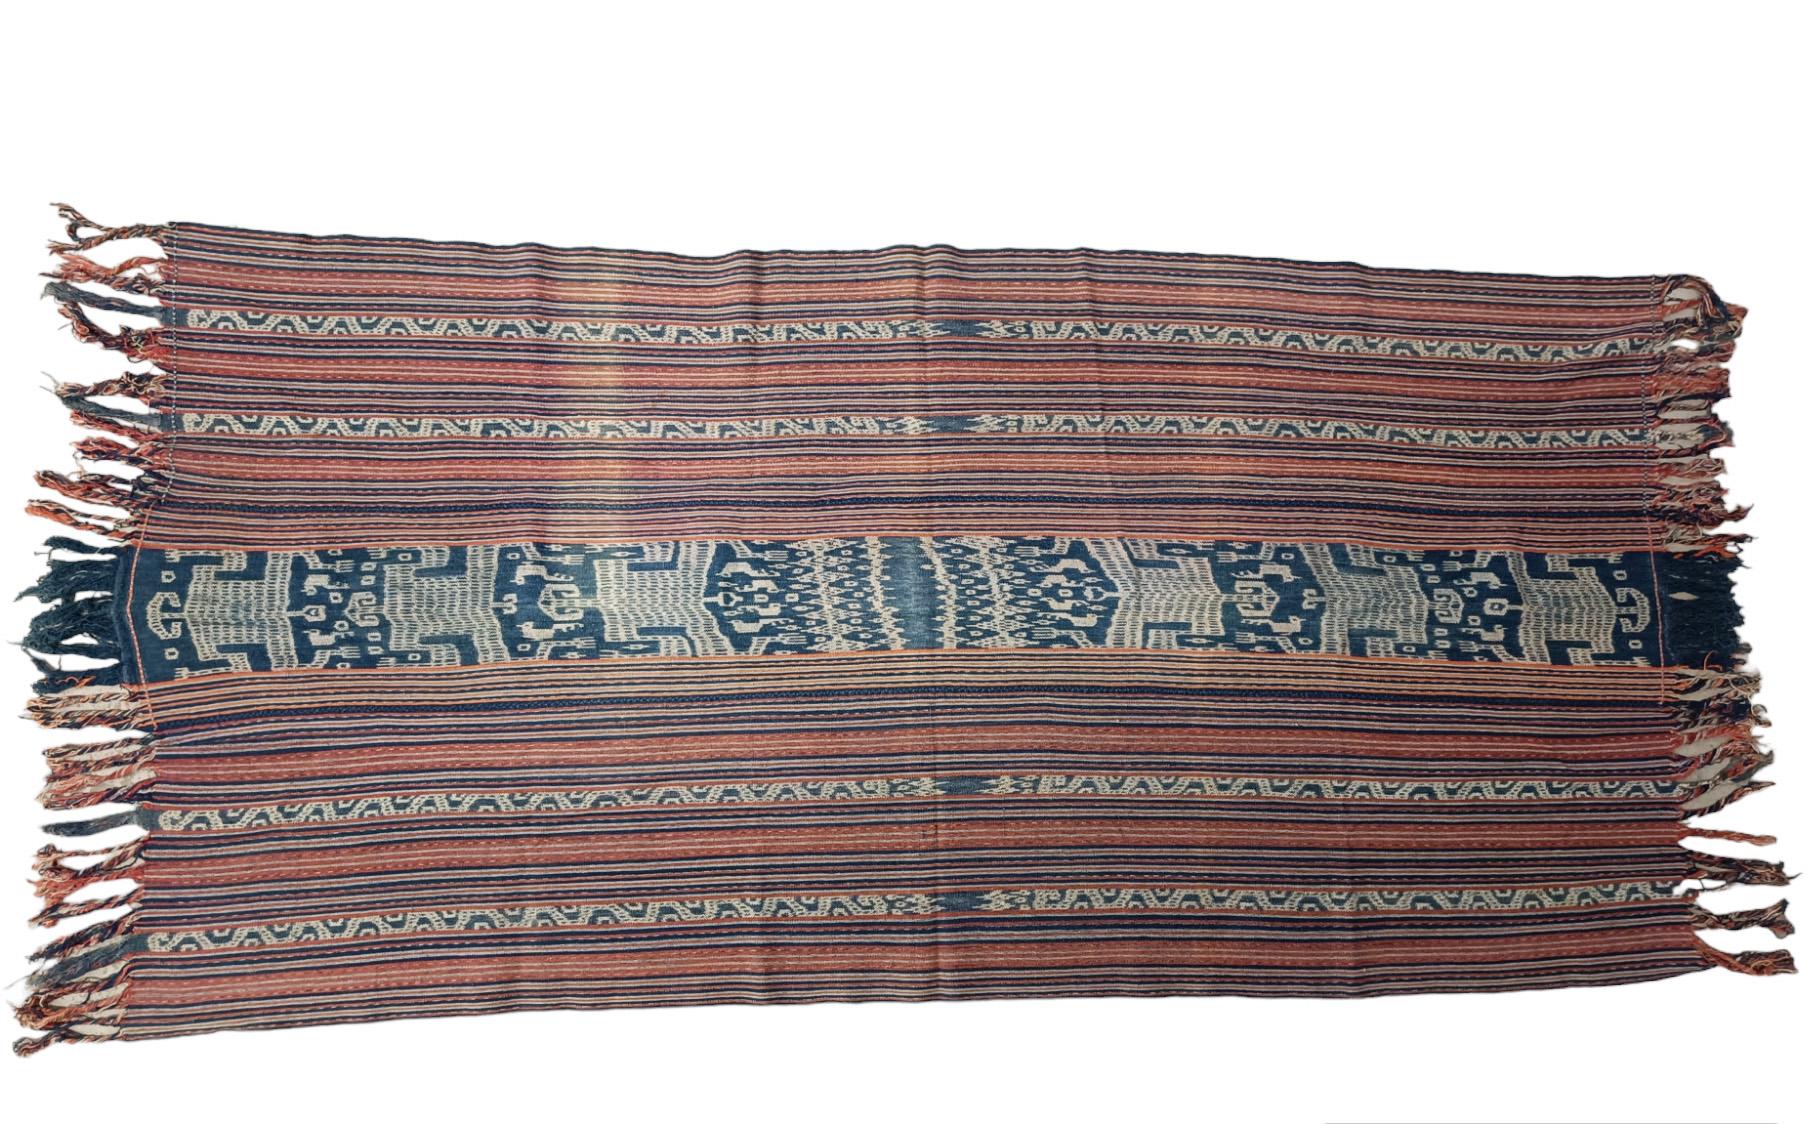 Indonesian Vintage Ikat Cloth Timor Indonesia Asian Textiles Home Decor For Sale